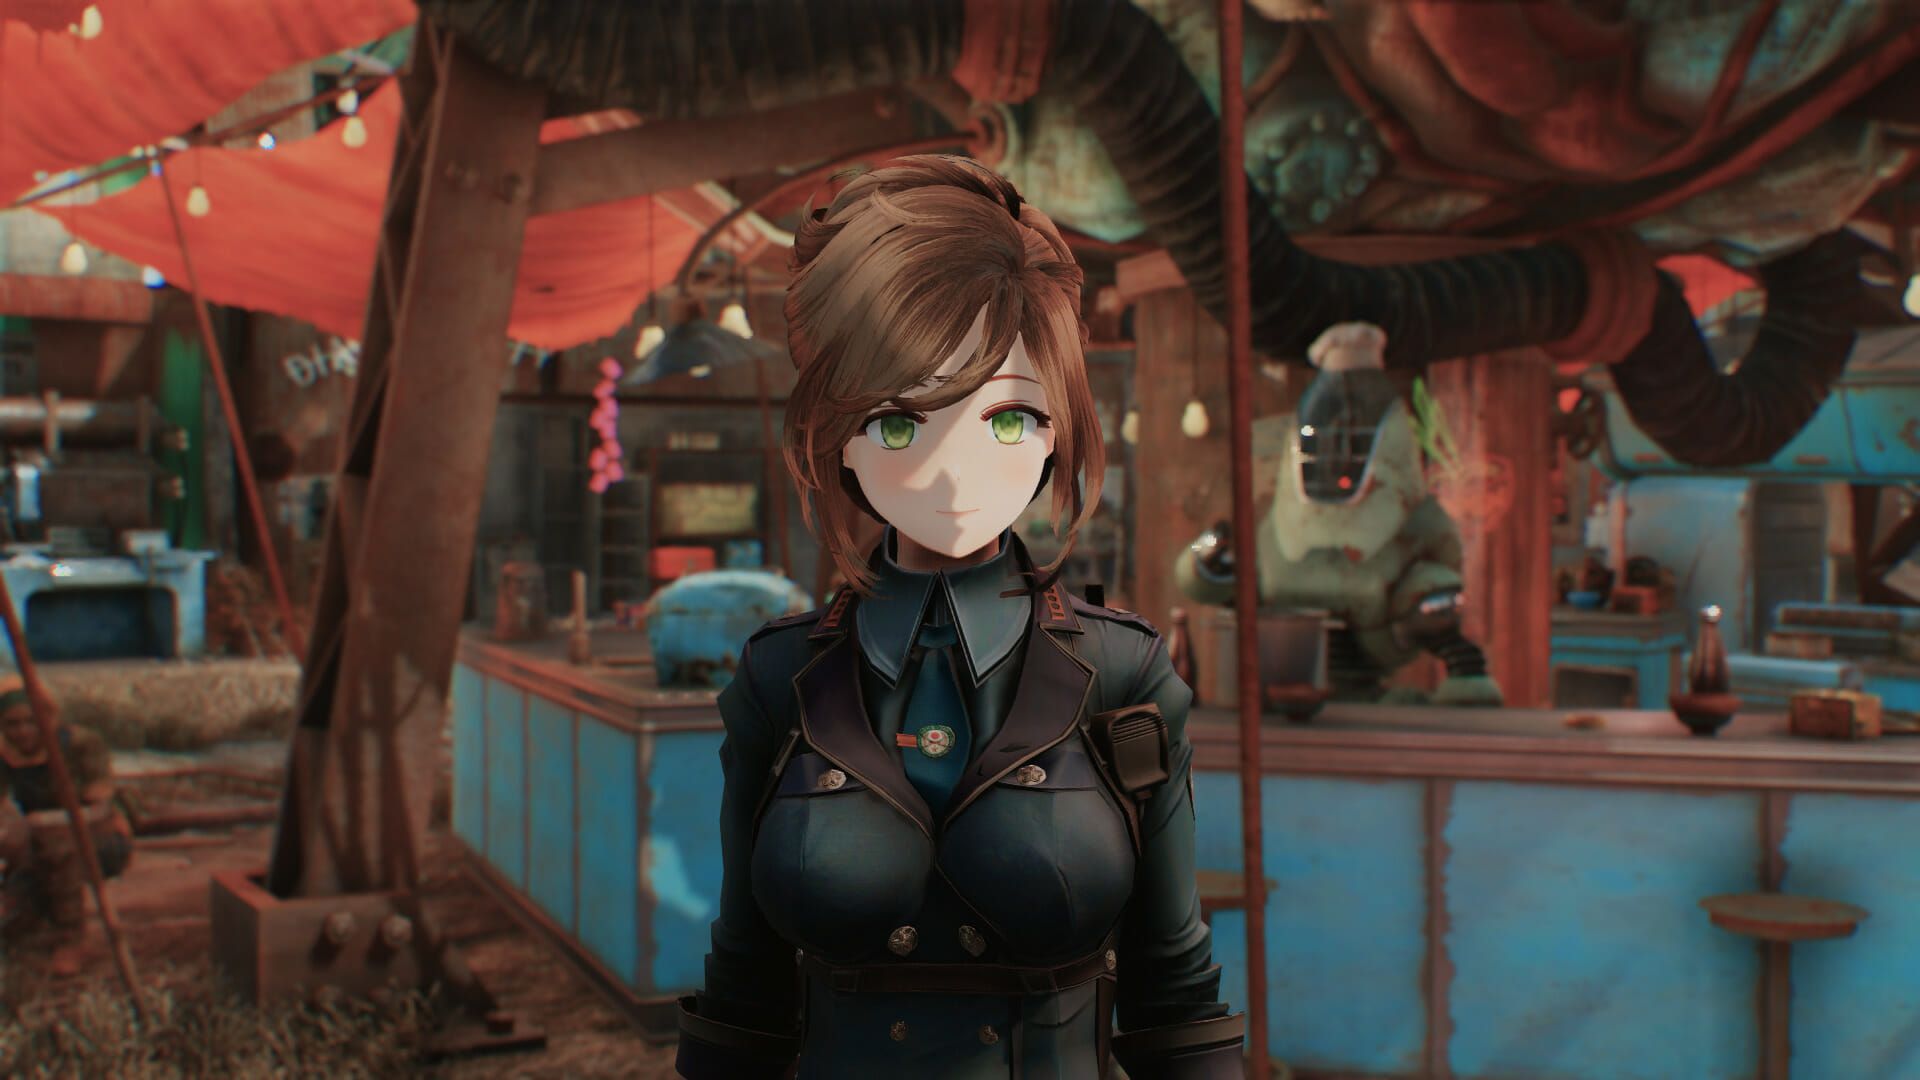 Fallout 4 Mod Makes Your Character a Cute Anime Girl